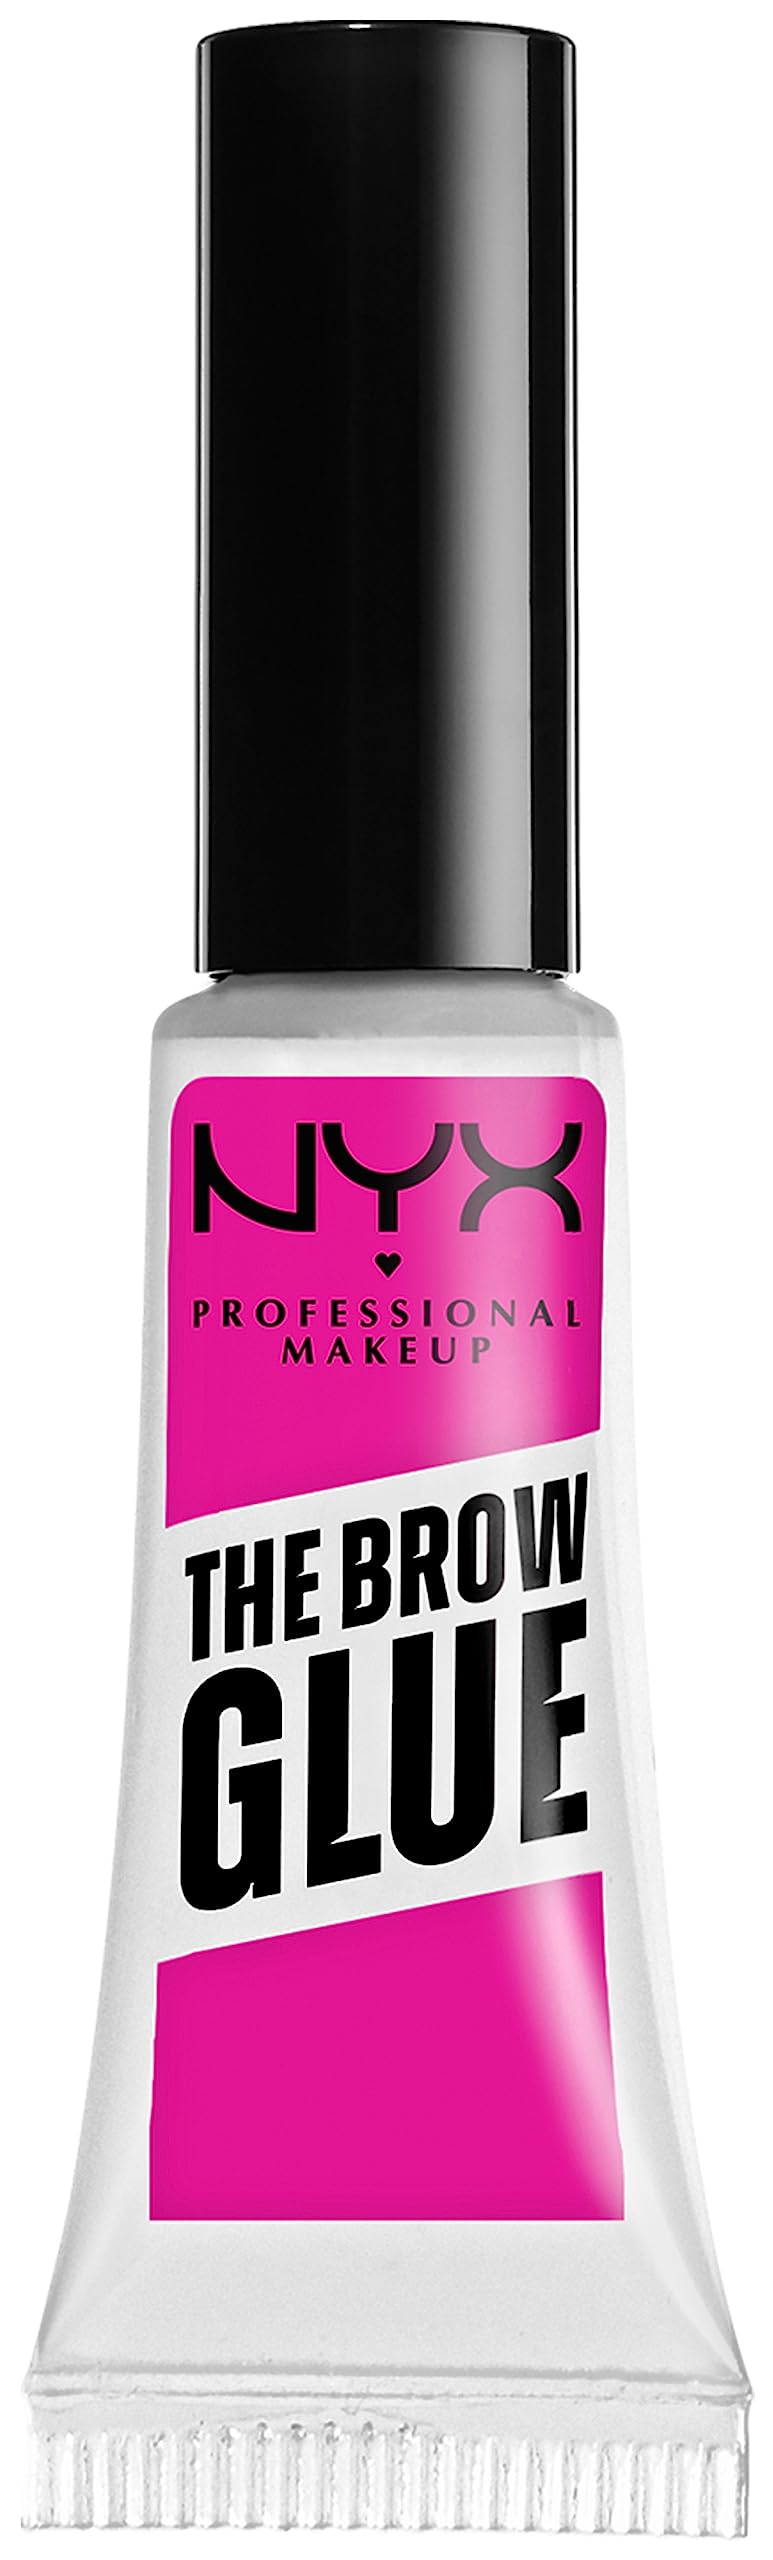 NYX PROFESSIONAL MAKEUP The Brow Glue Instant Brow Styler